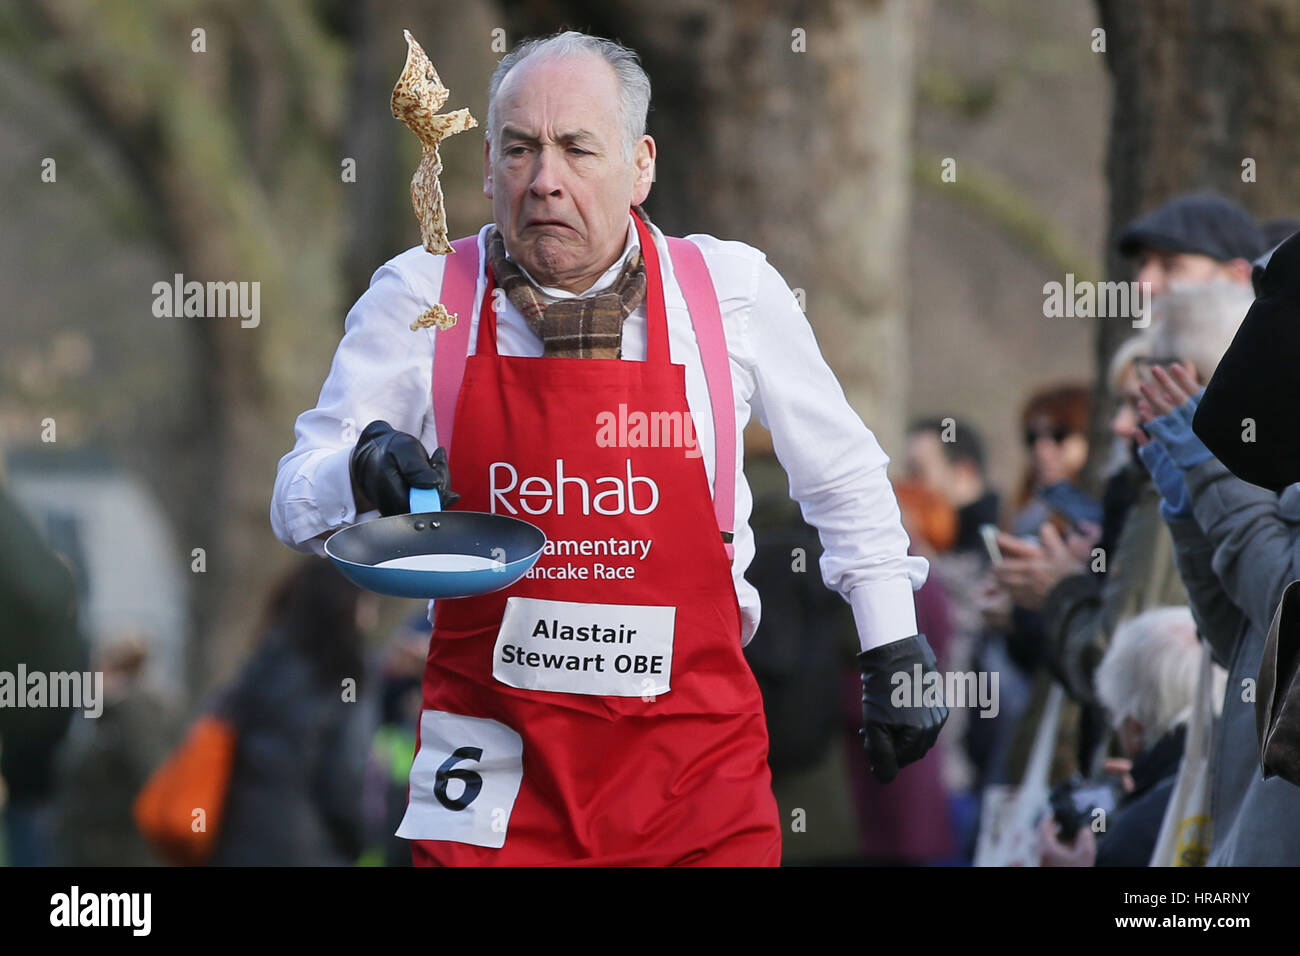 London, UK. 28th Feb, 2017. Television presenter Alastair Stewart takes part in the Rehab Parliamentary Pancake Race in Victoria Tower Gardens, in London, Britain on Feb. 28, 2017. The annual race held on Shrove Tuesday is a relay between MPs, Lords and the media, and raises money for the Rehab disability charity. Credit: Tim Ireland/Xinhua/Alamy Live News Stock Photo